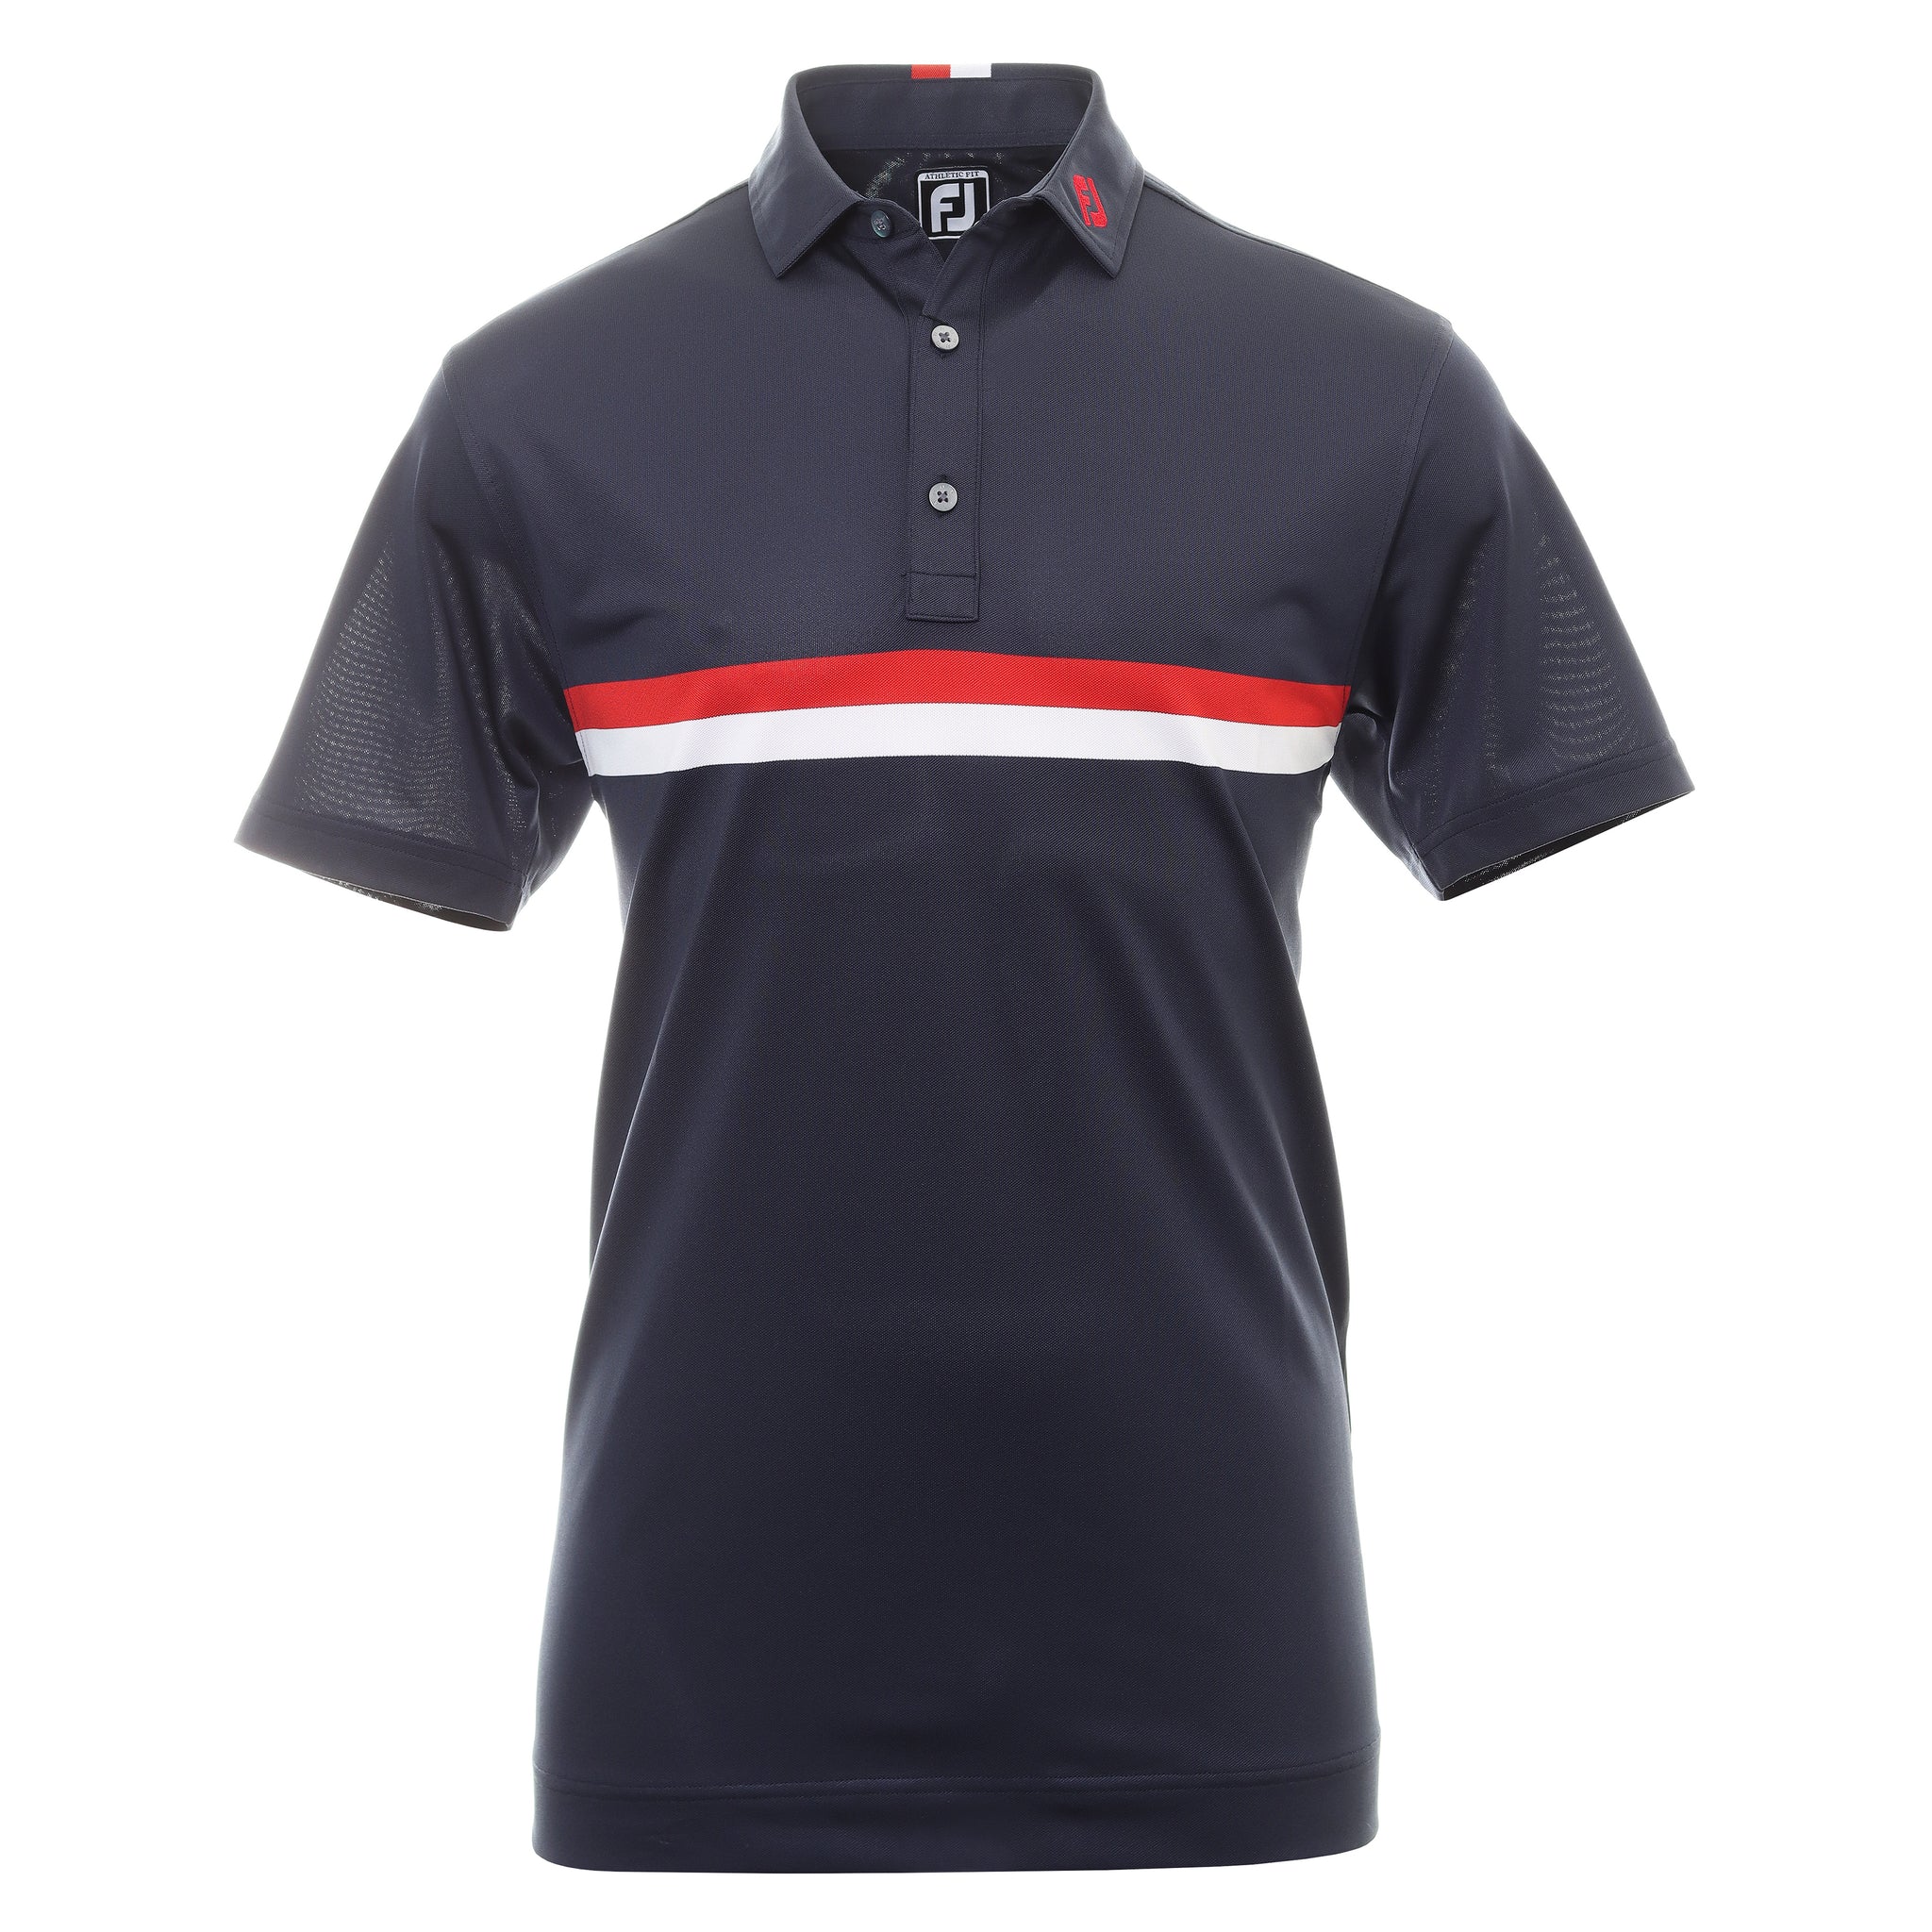 FootJoy Double Chest Band Pique Golf Shirt 88440 Navy Red White ...